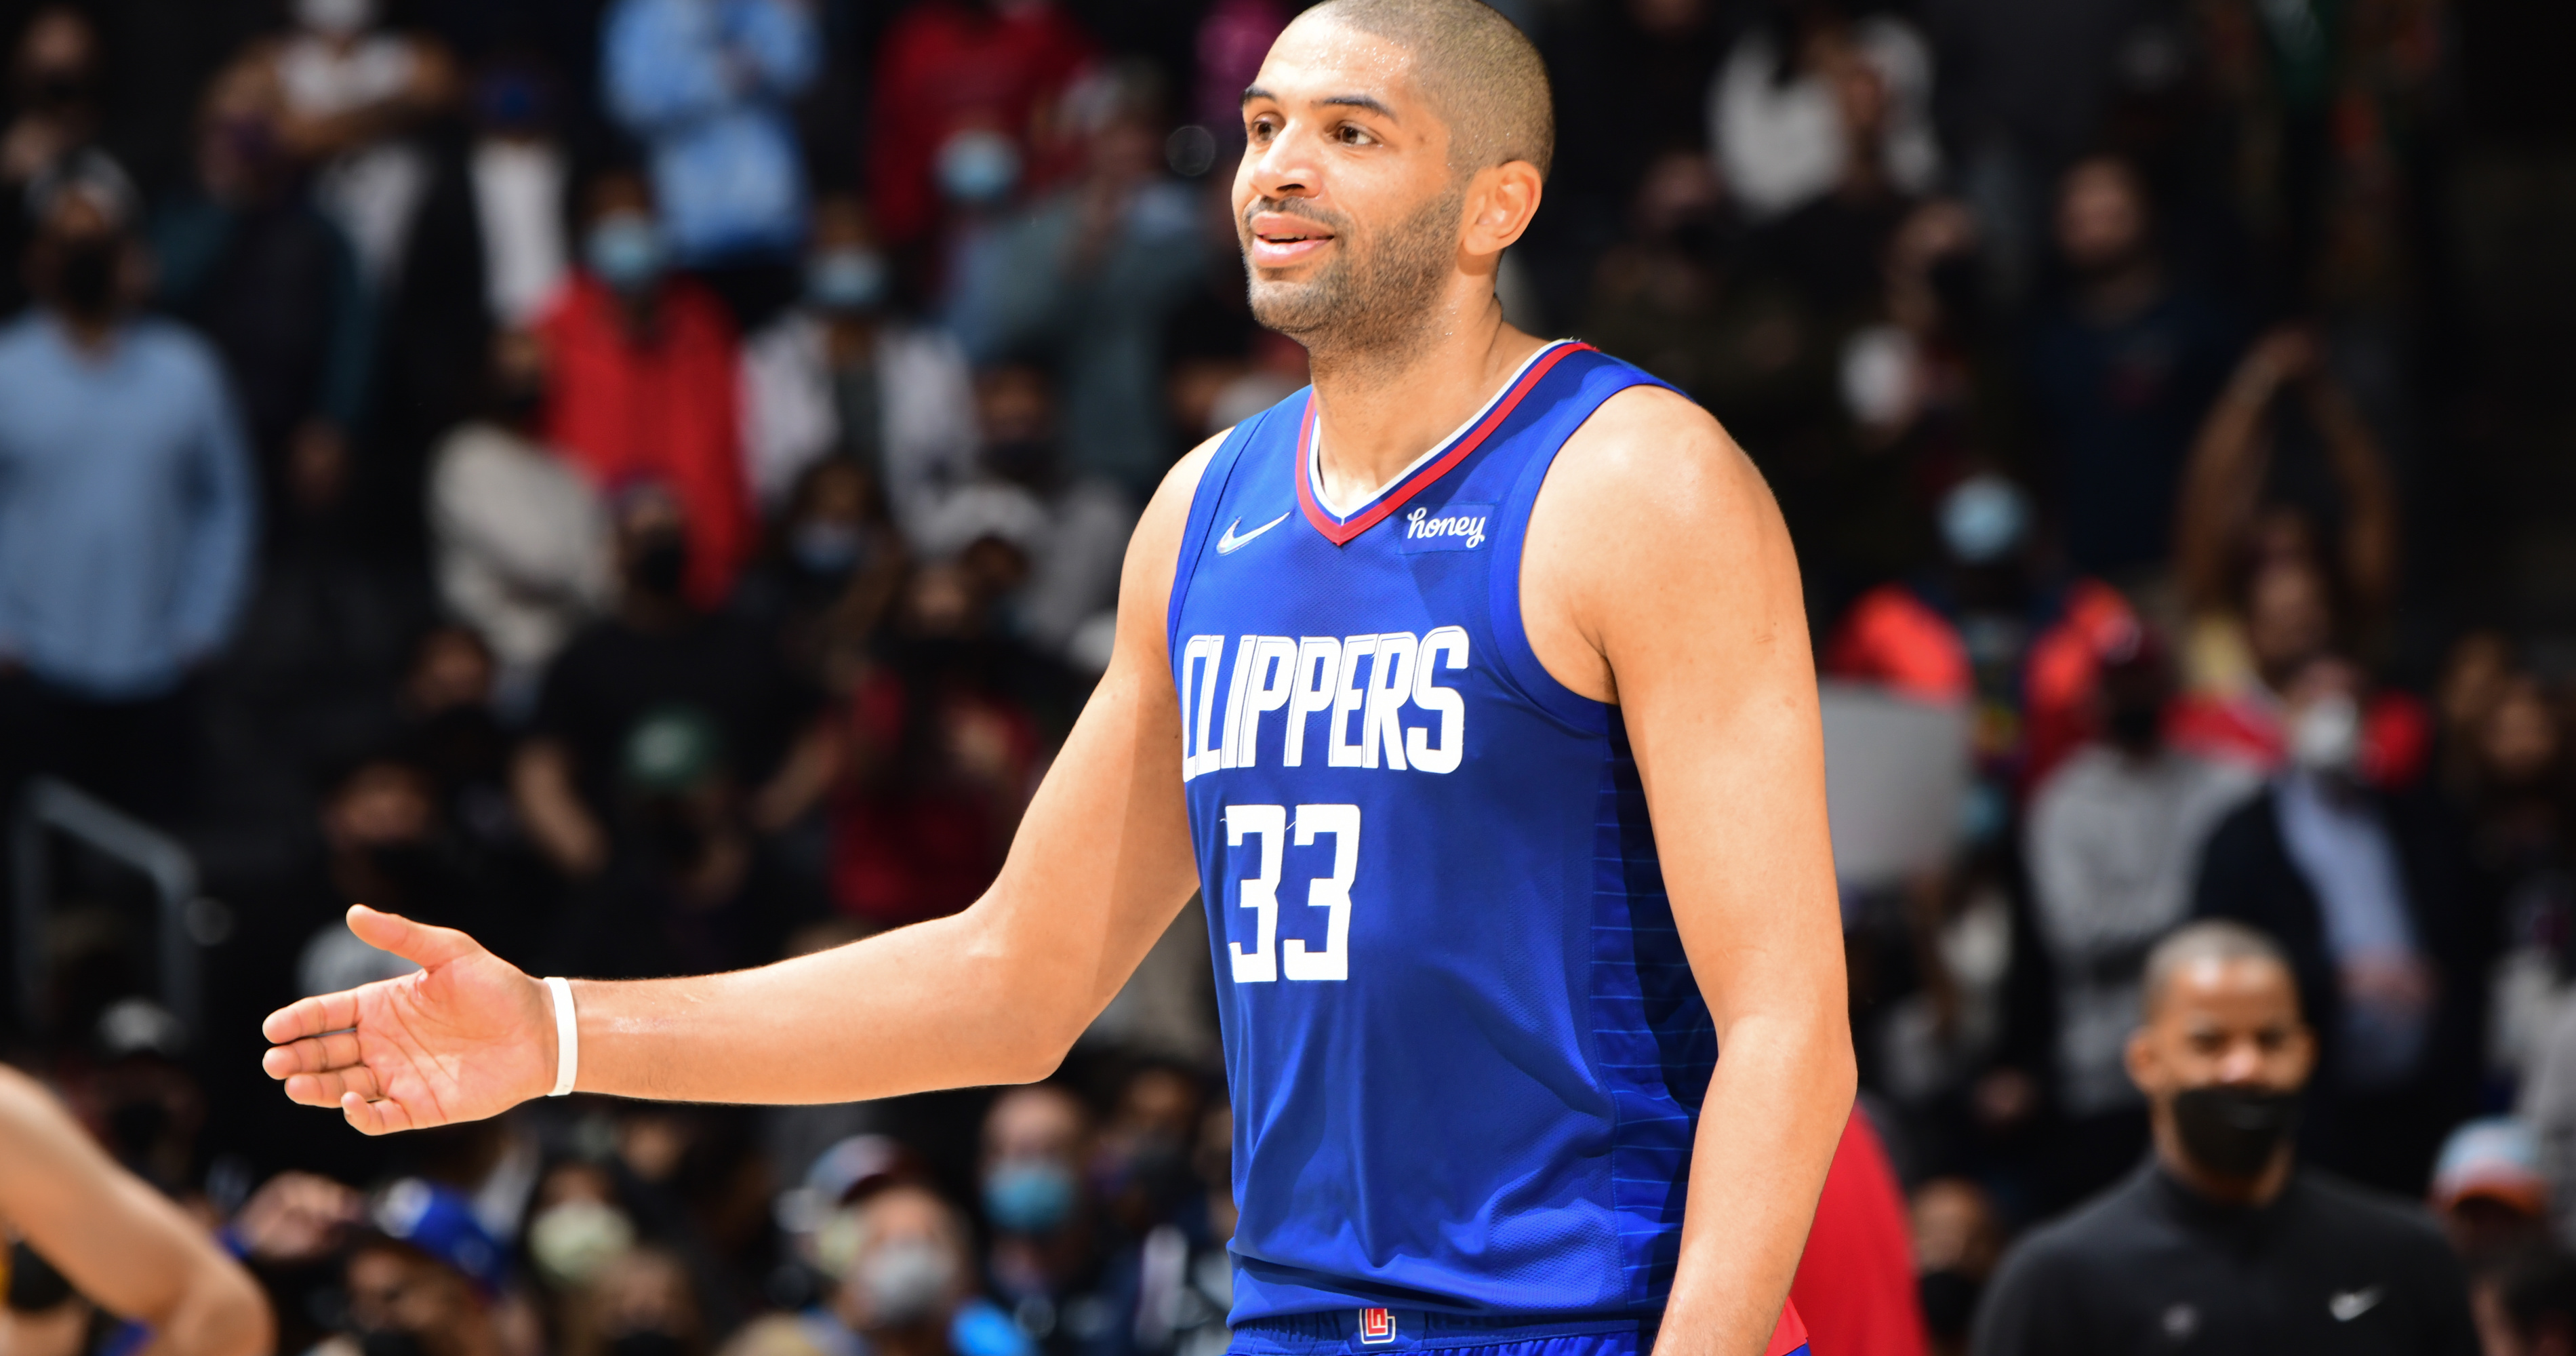 NBA Rumors: Clippers' Nicolas Batum Expected To Re-Sign Amid Interest